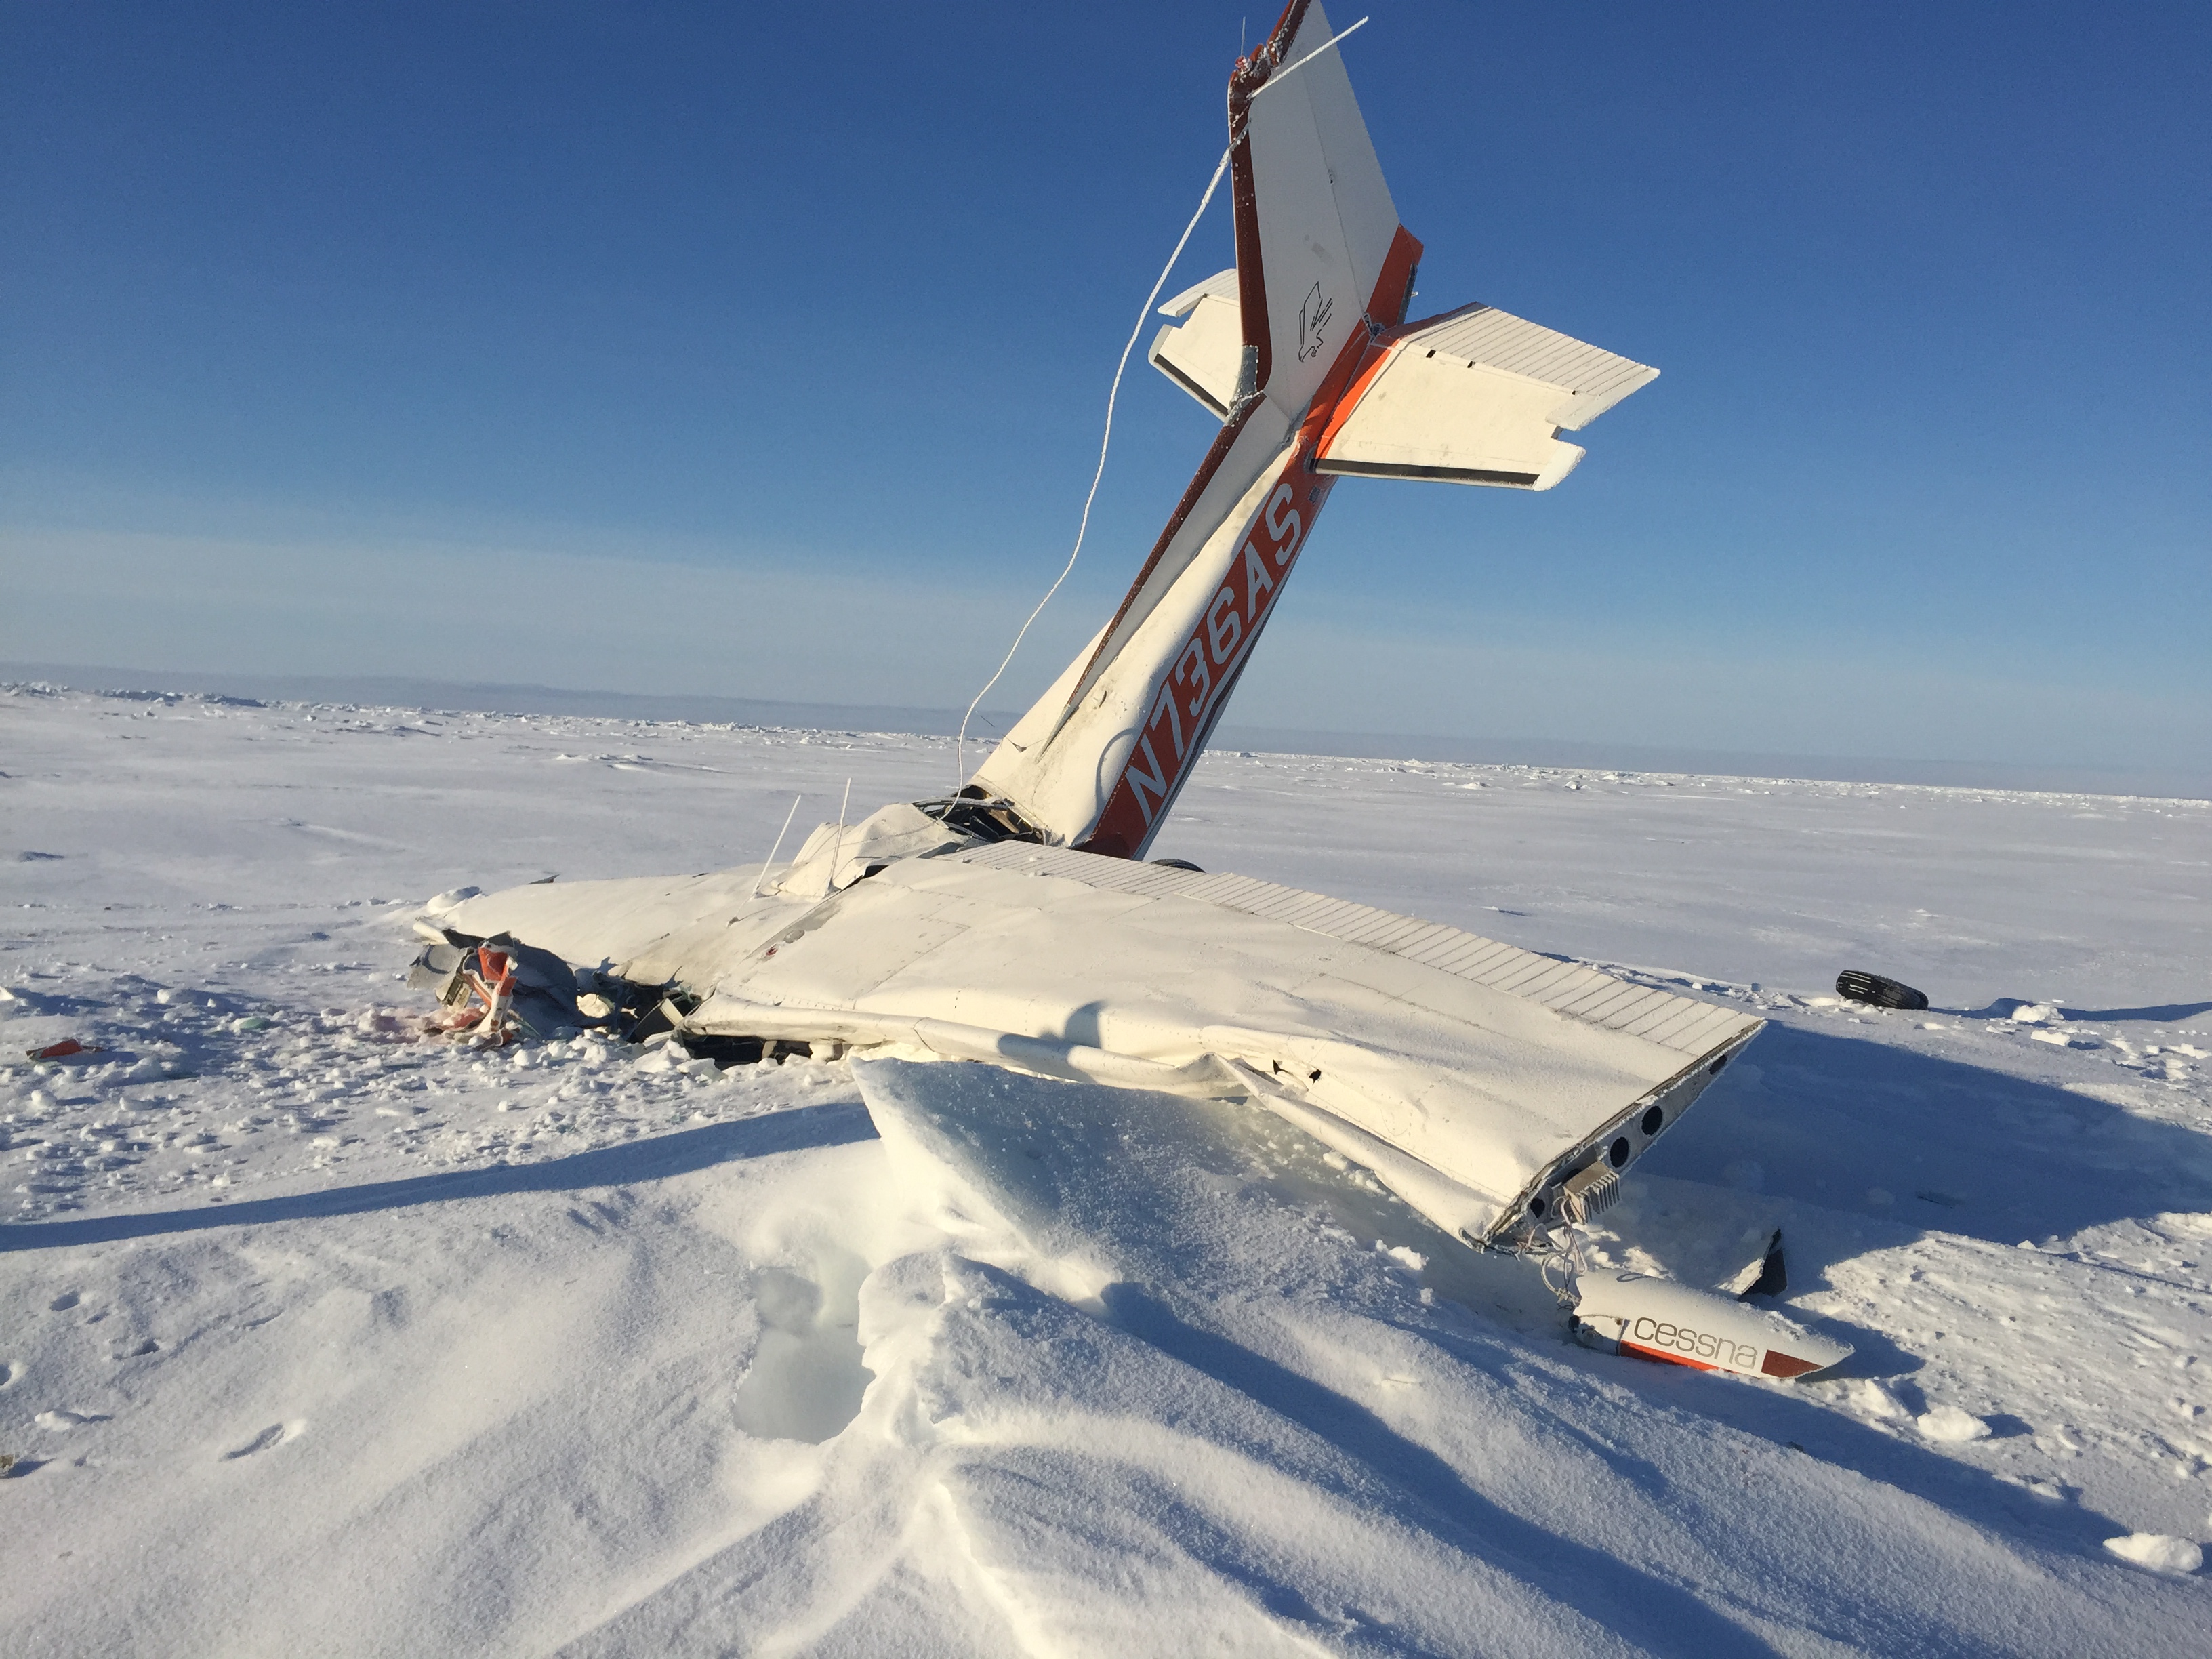 Thomas Grainger’s plane, a single-engine, single-passenger Cessna 172, could not land in Nome because of weather and went down after 10:30 p.m. Sunday, March 5, 2017. (Photo courtesy Alaska State Troopers)